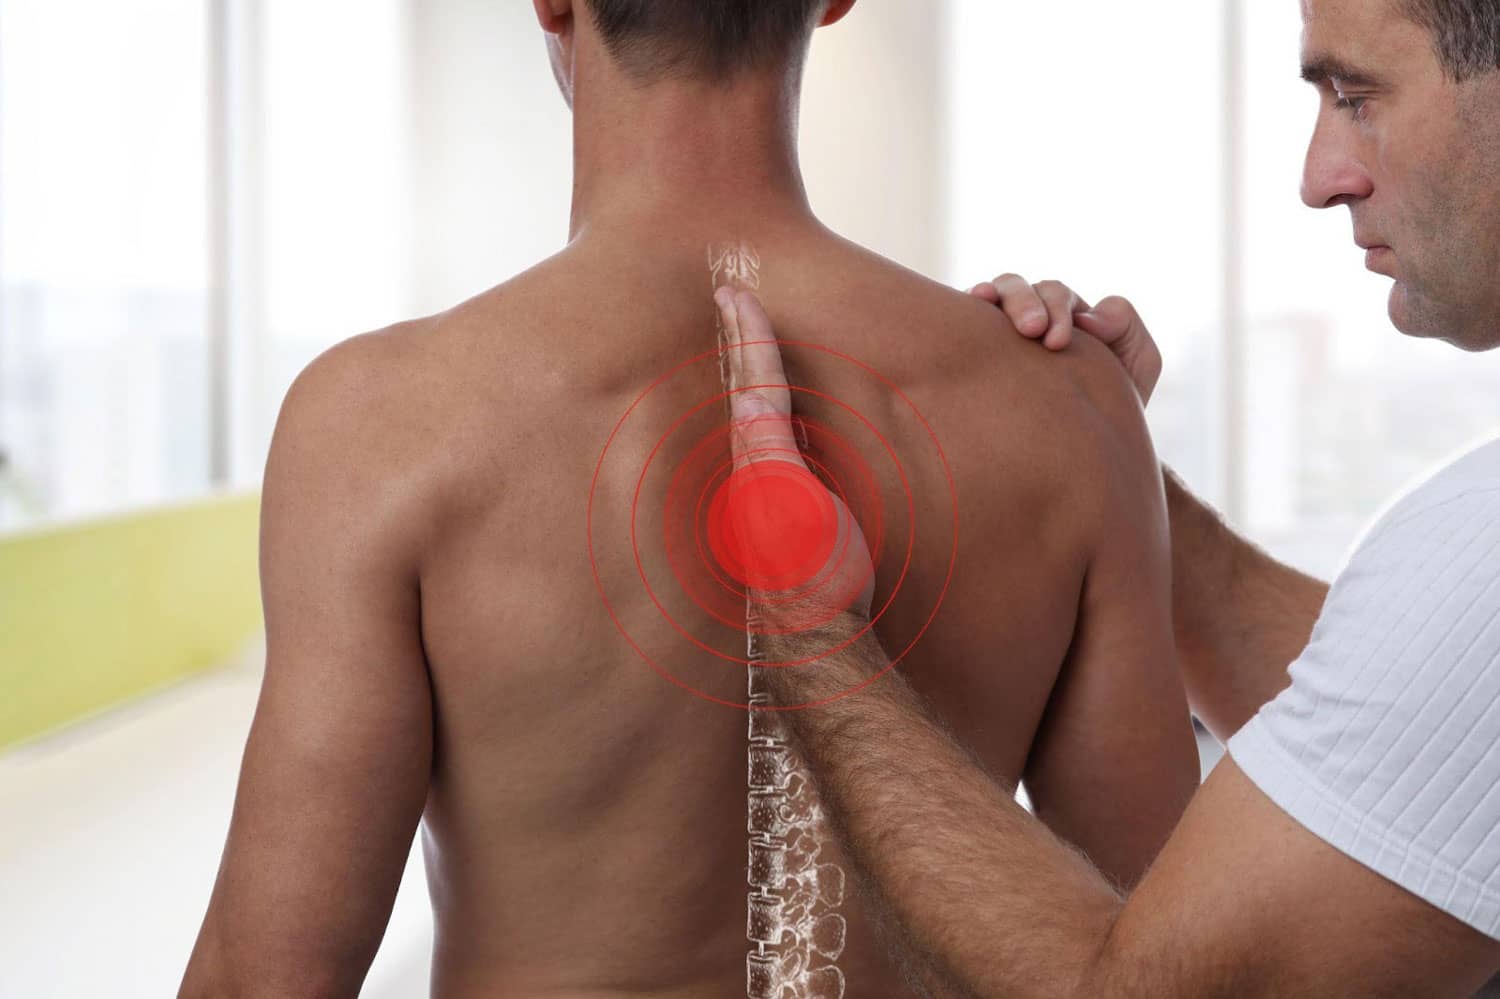 A man getting a chiropractic adjustment for back pain.